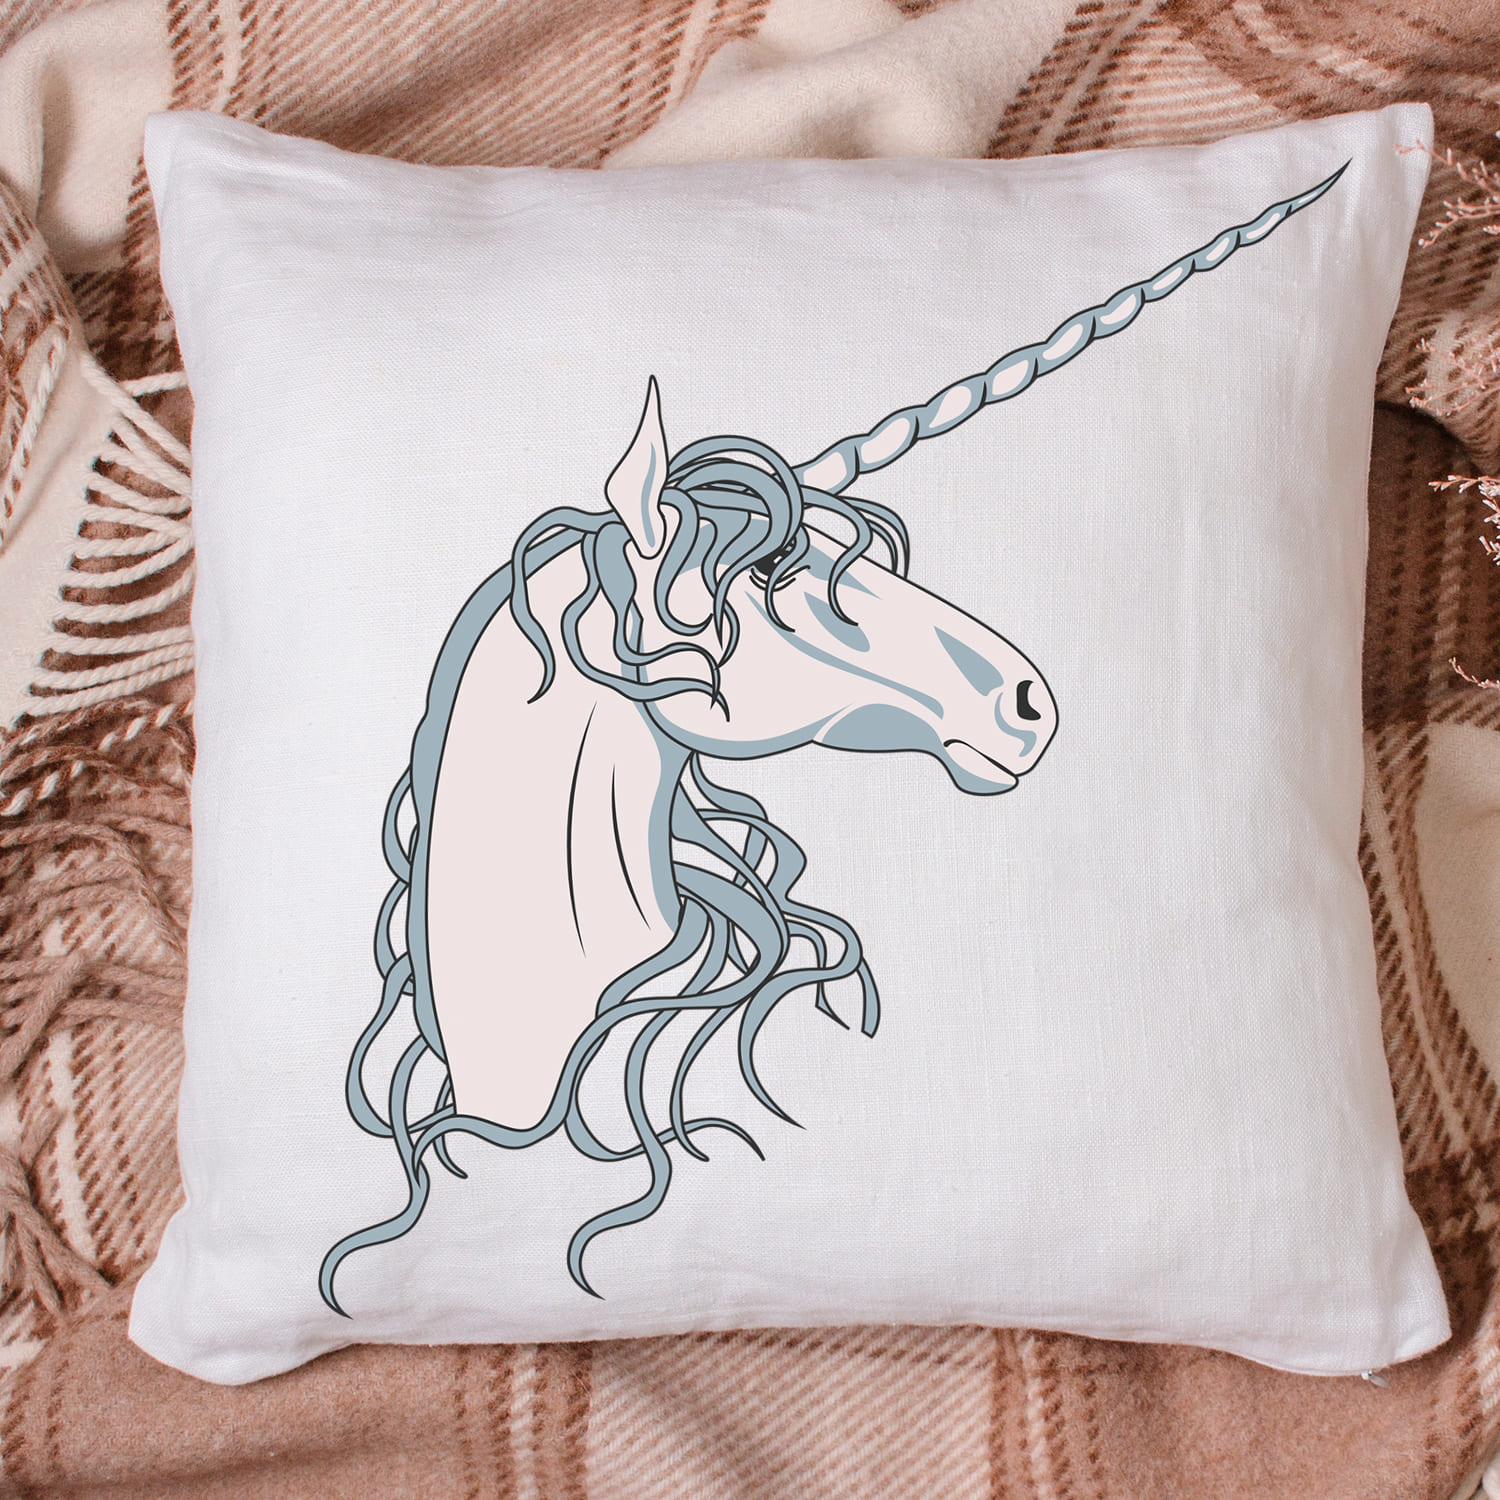 Cute pillow with unicorn image.